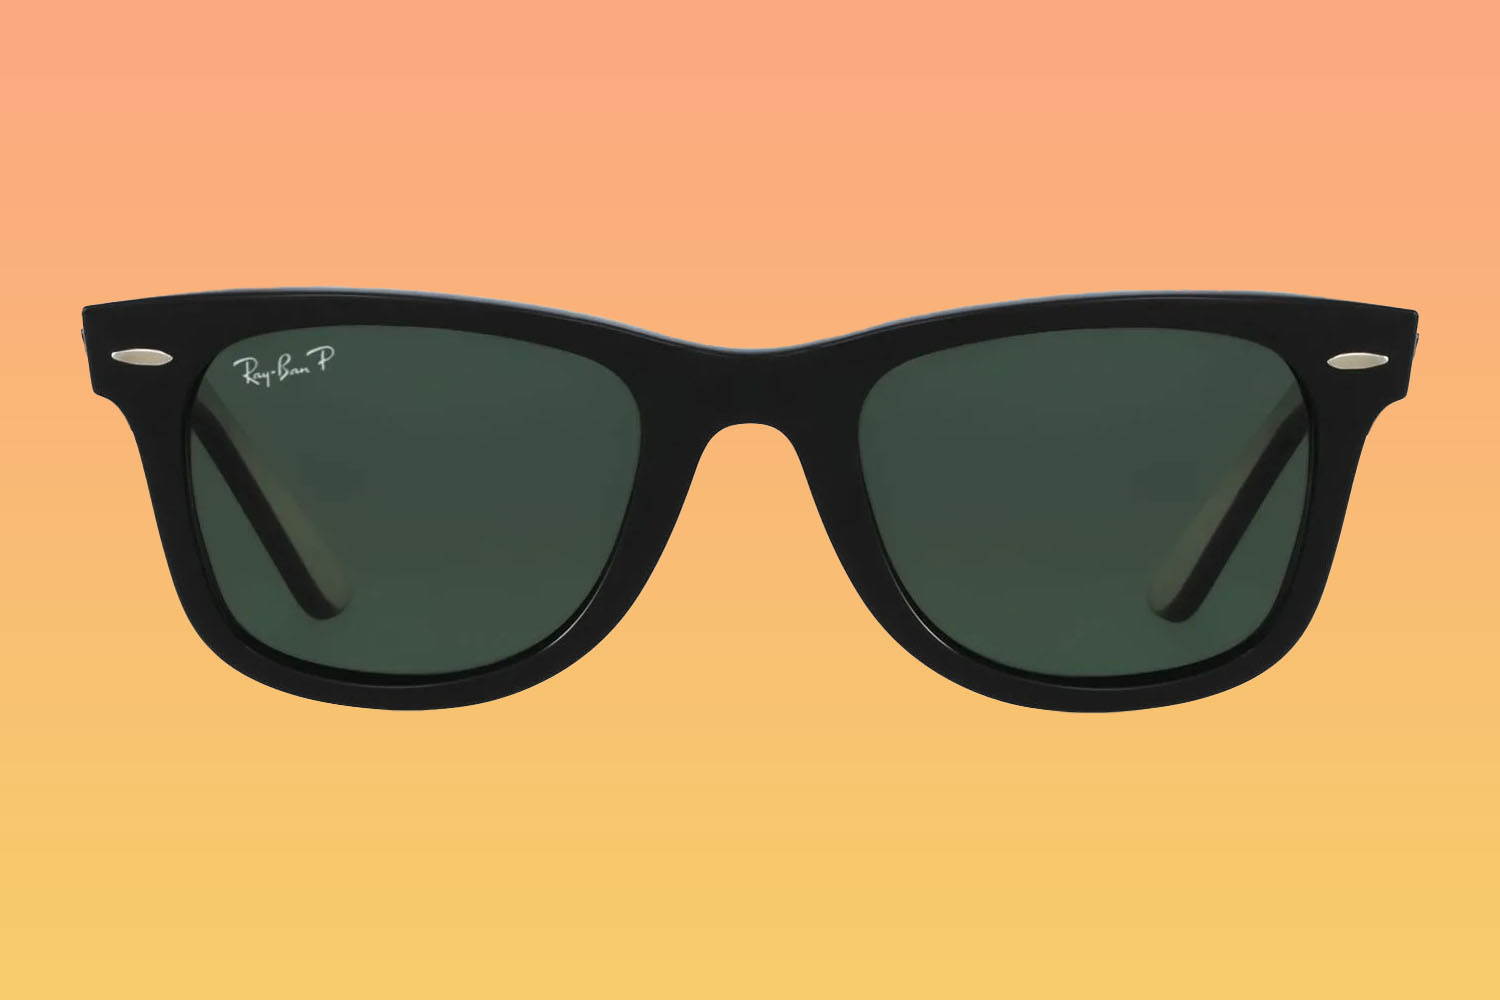 A pair of Ray-Ban sunglasses on a orange-to-yellow gradient background